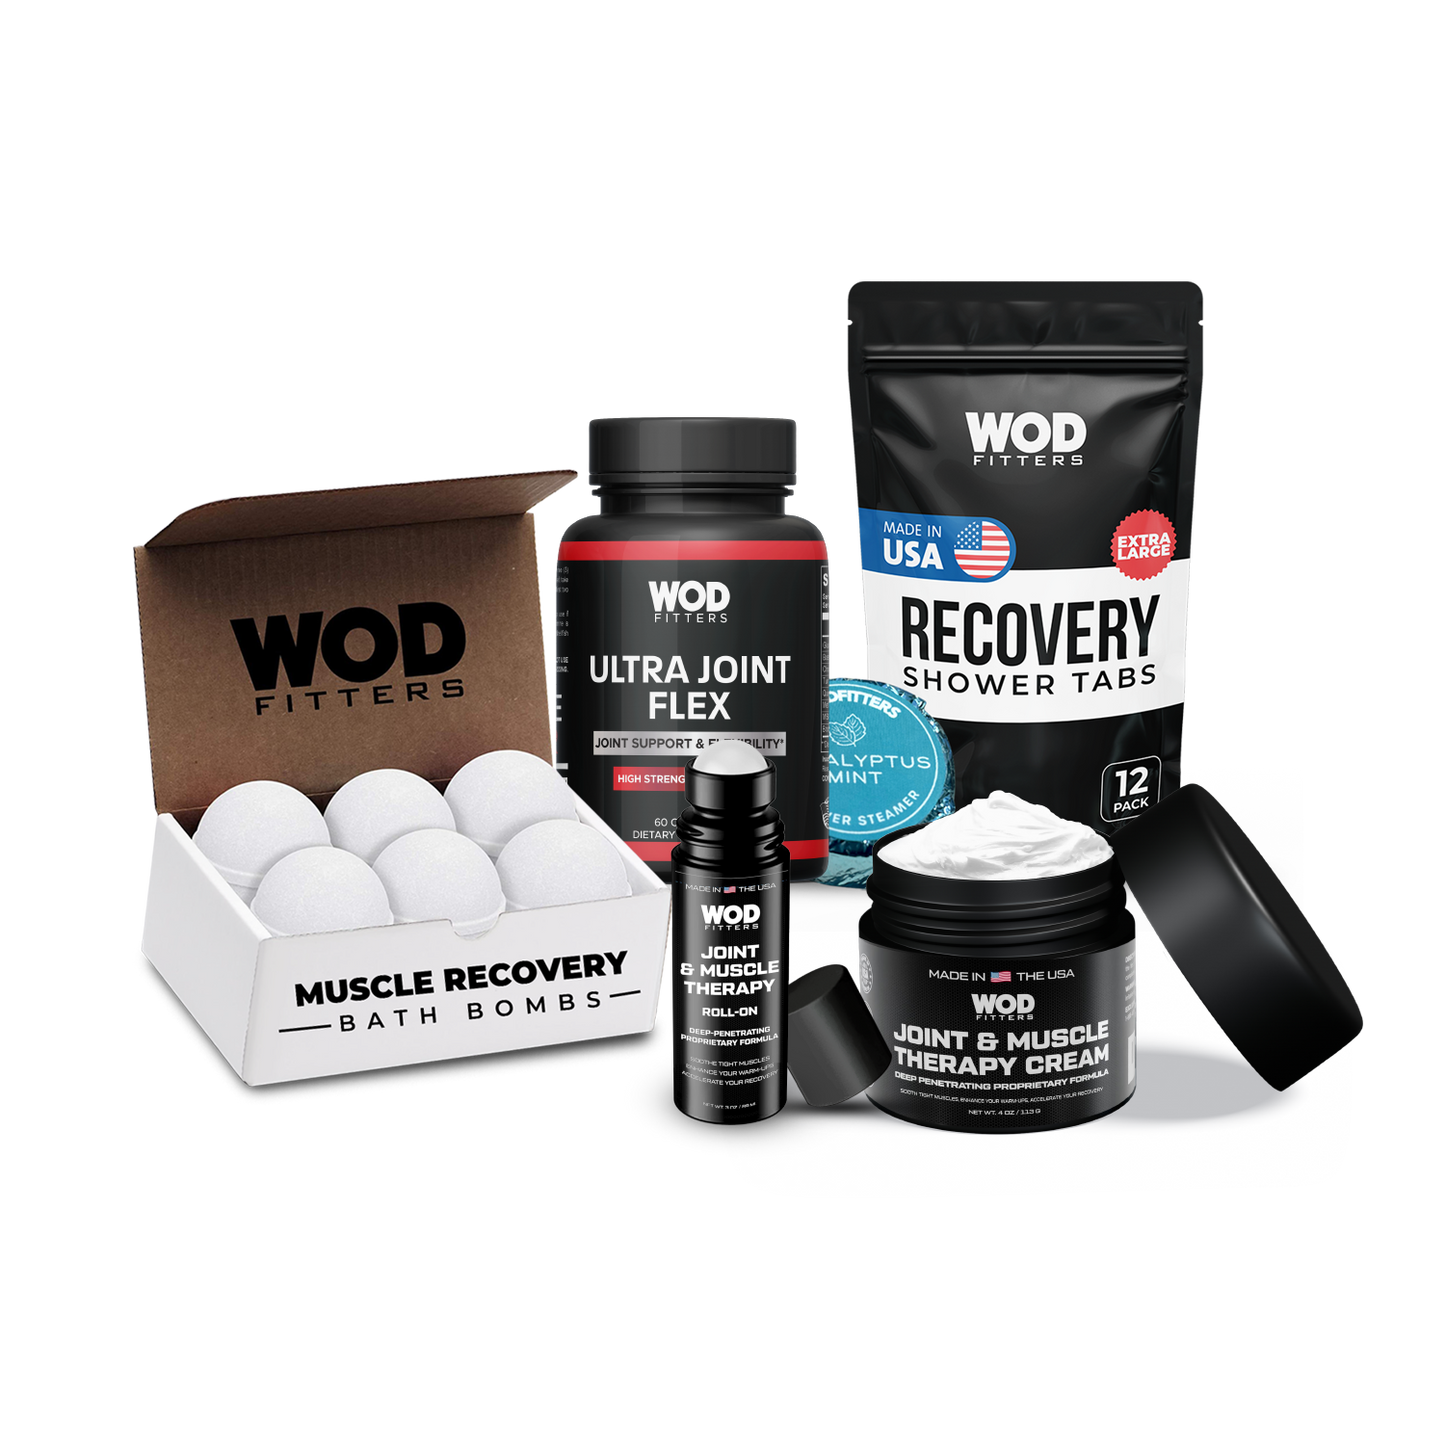 WODFitters Ultimate Recovery Bundle Monthly Subscription